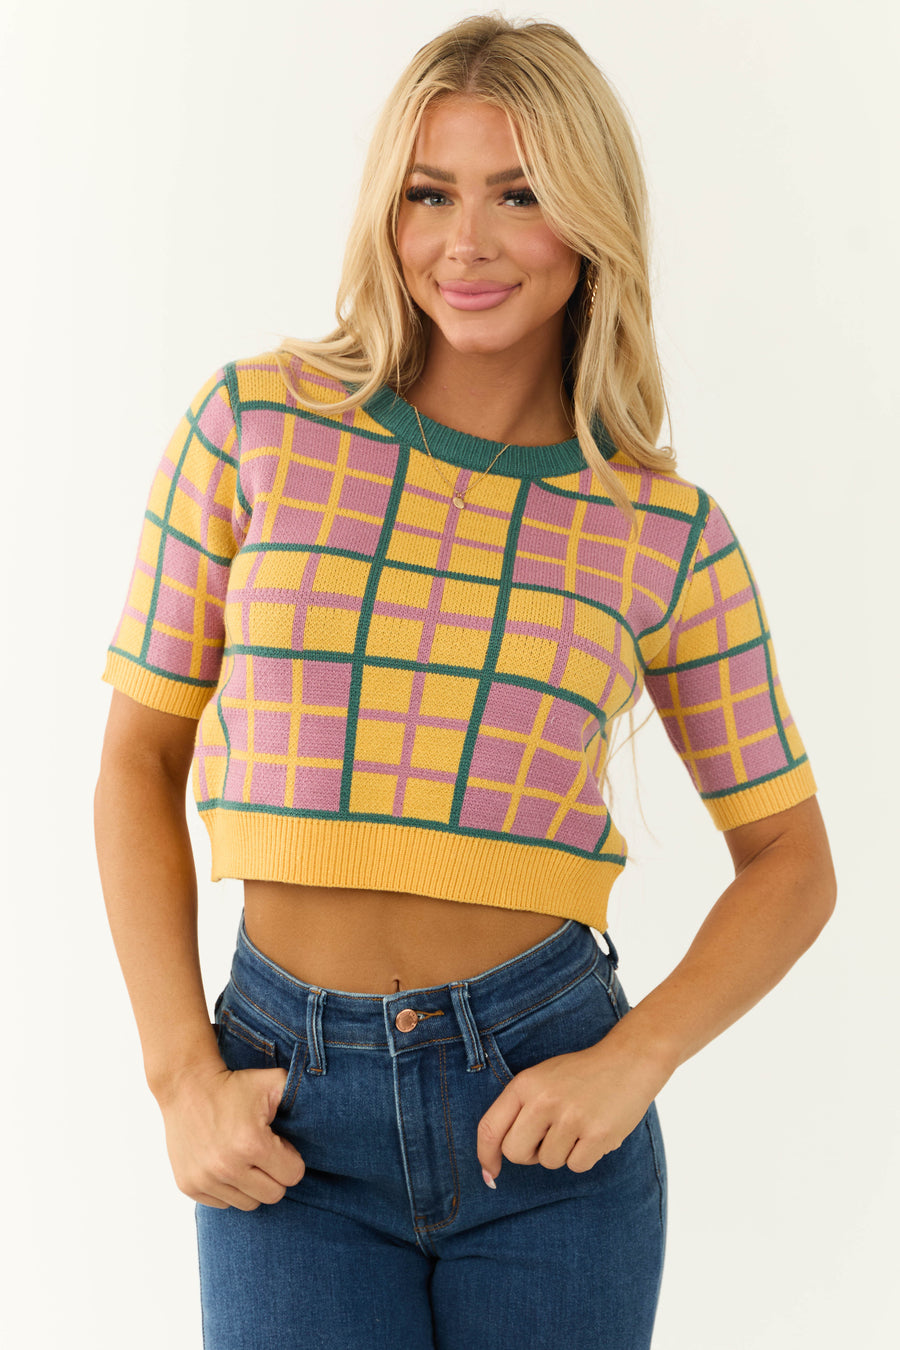 Canary Yellow Square Print Knit Sweater Top